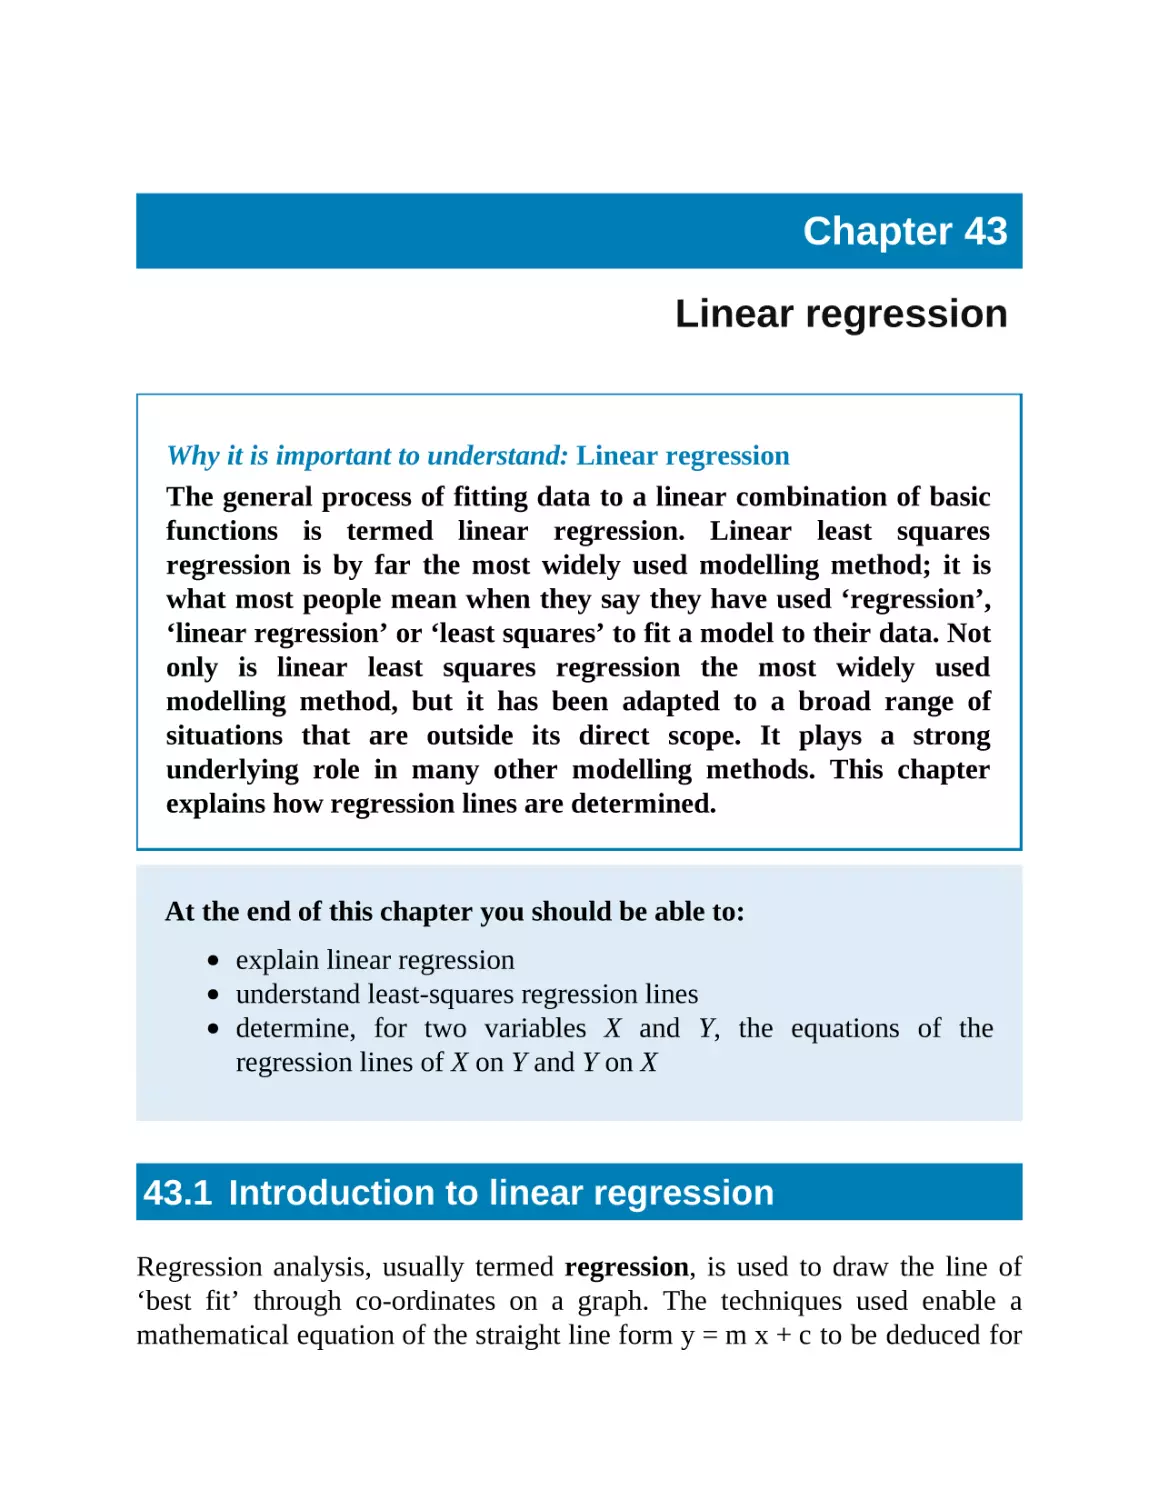 43 Linear regression
43.1 Introduction to linear regression